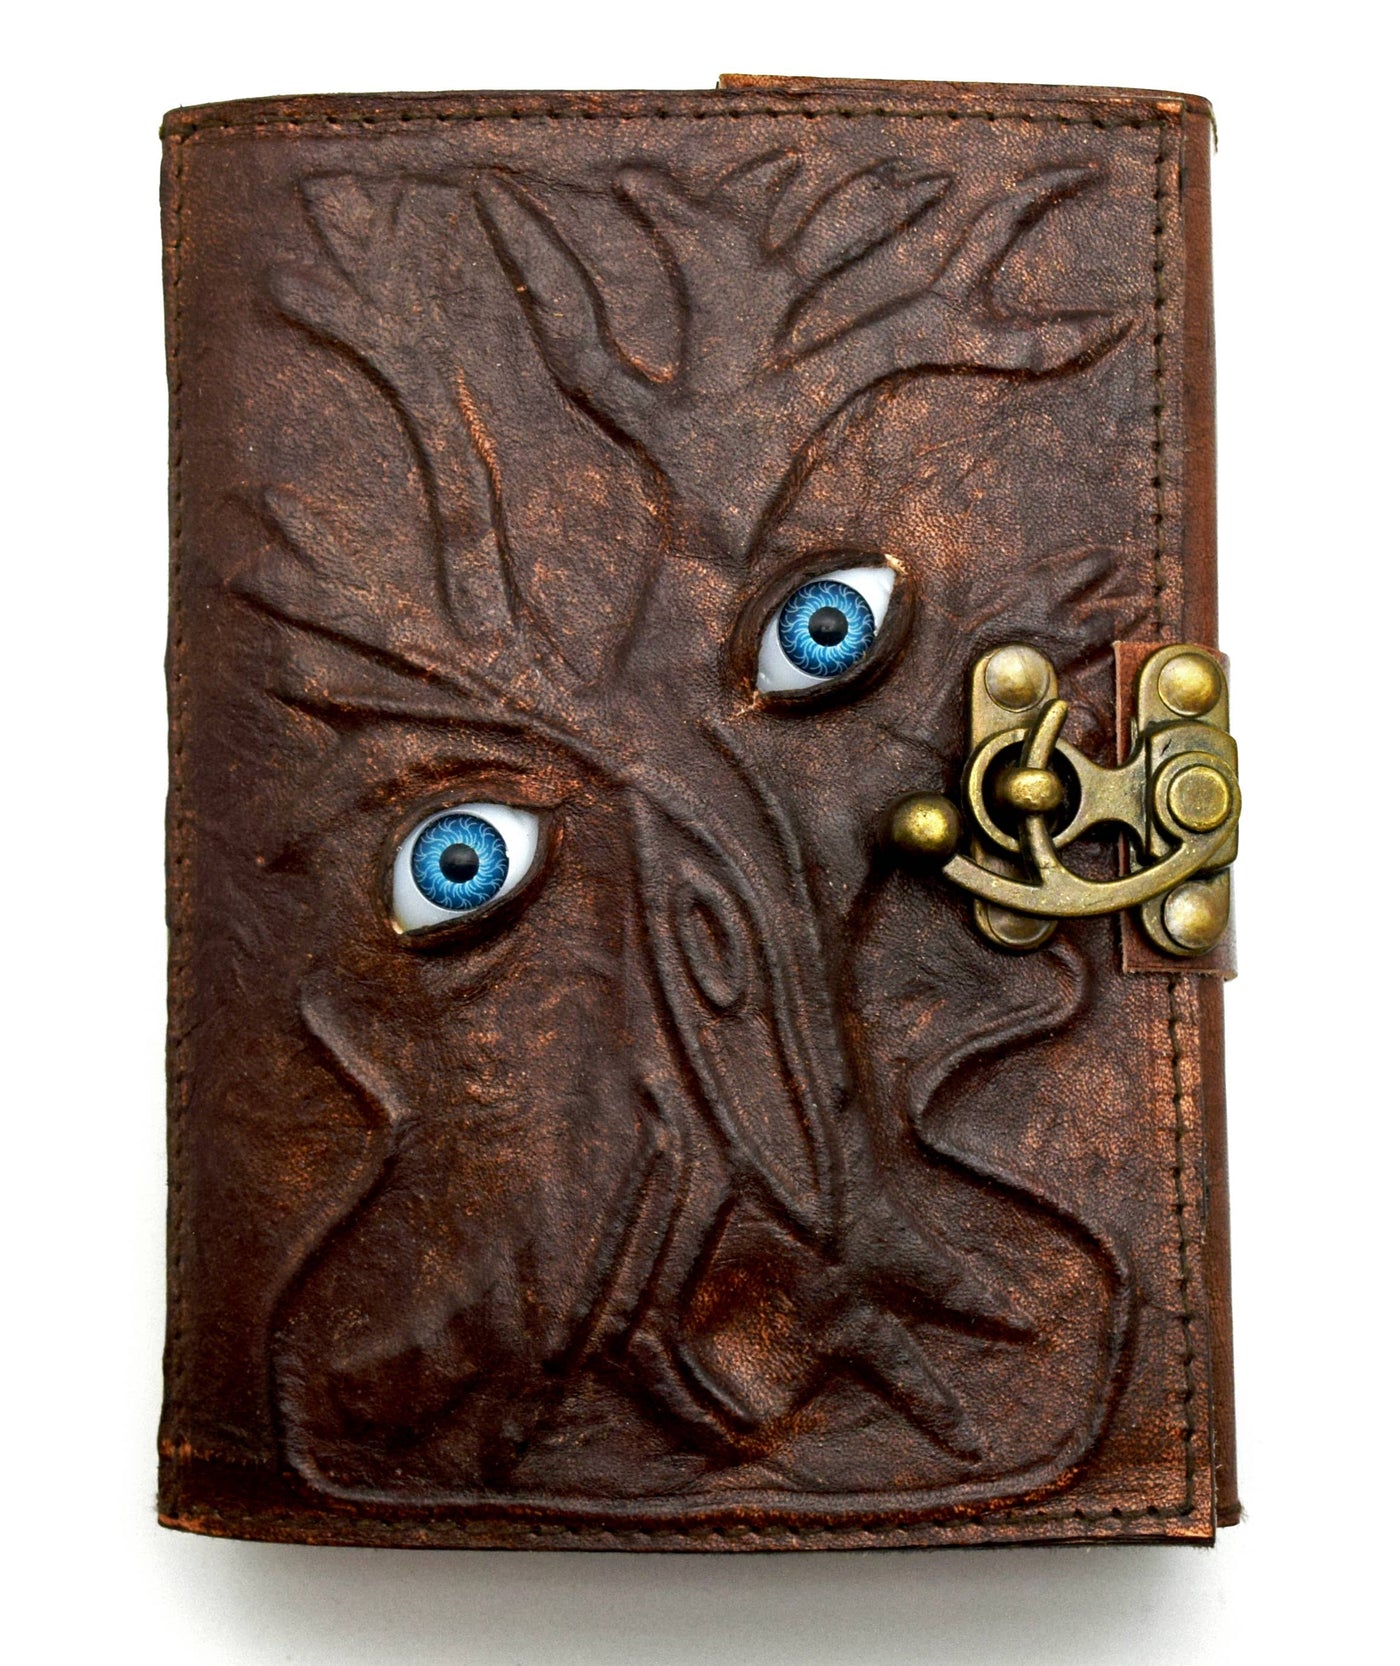 Two Eyes Looking at You Leather Embossed Journal - 5" x 7"